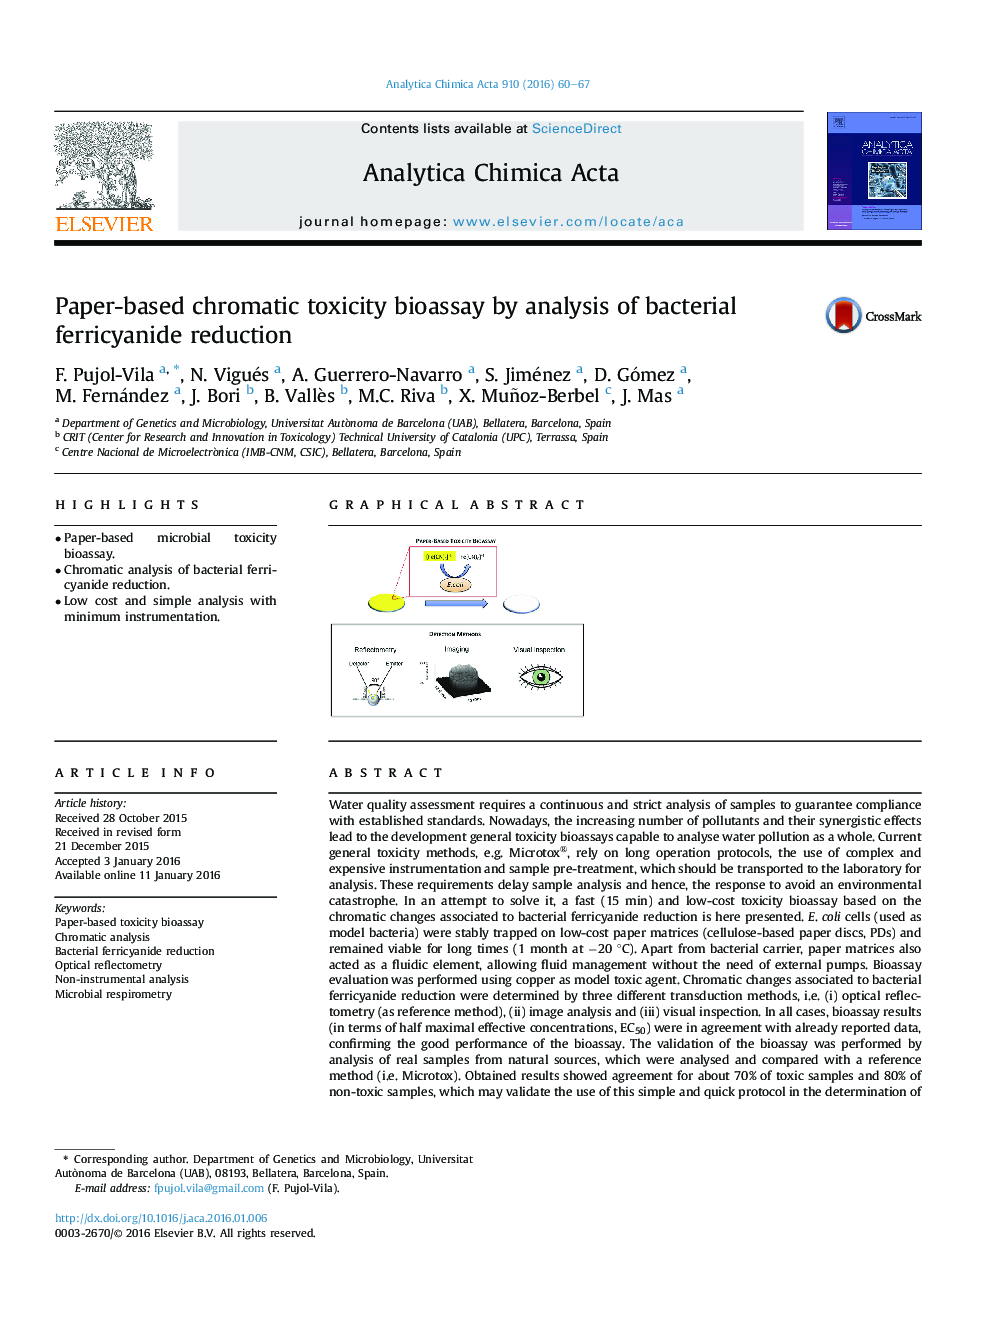 Paper-based chromatic toxicity bioassay by analysis of bacterial ferricyanide reduction